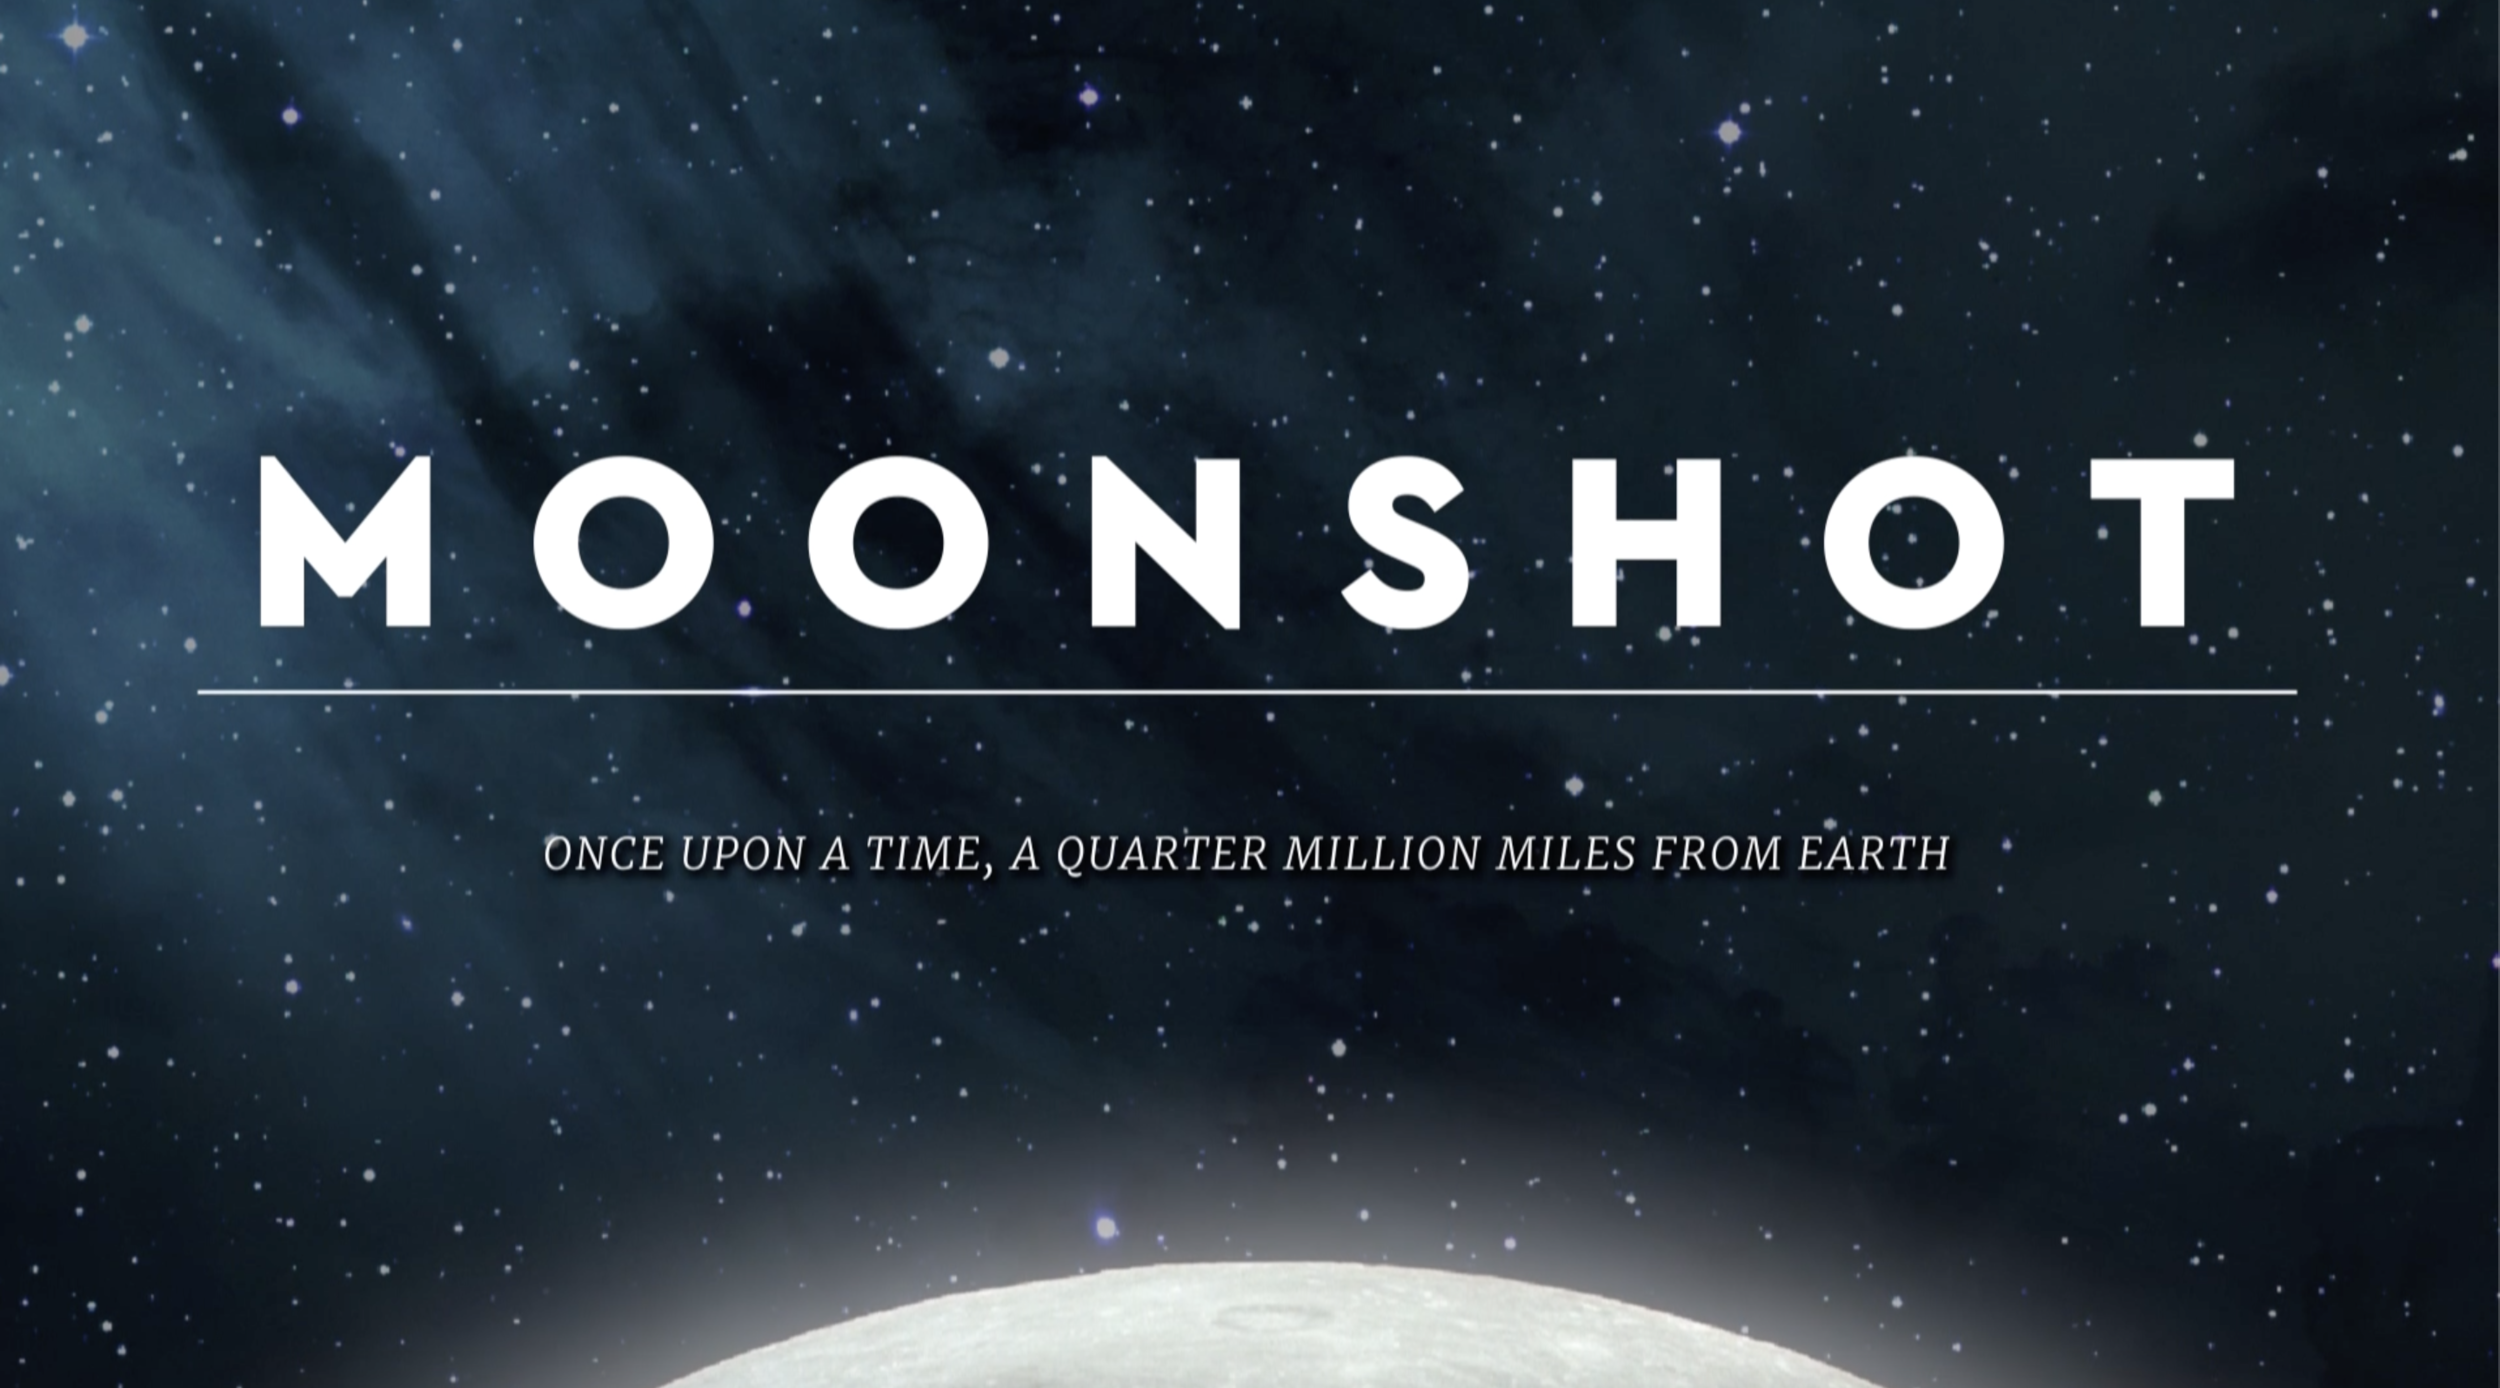 A Quarter Million Miles From Earth | July 2019